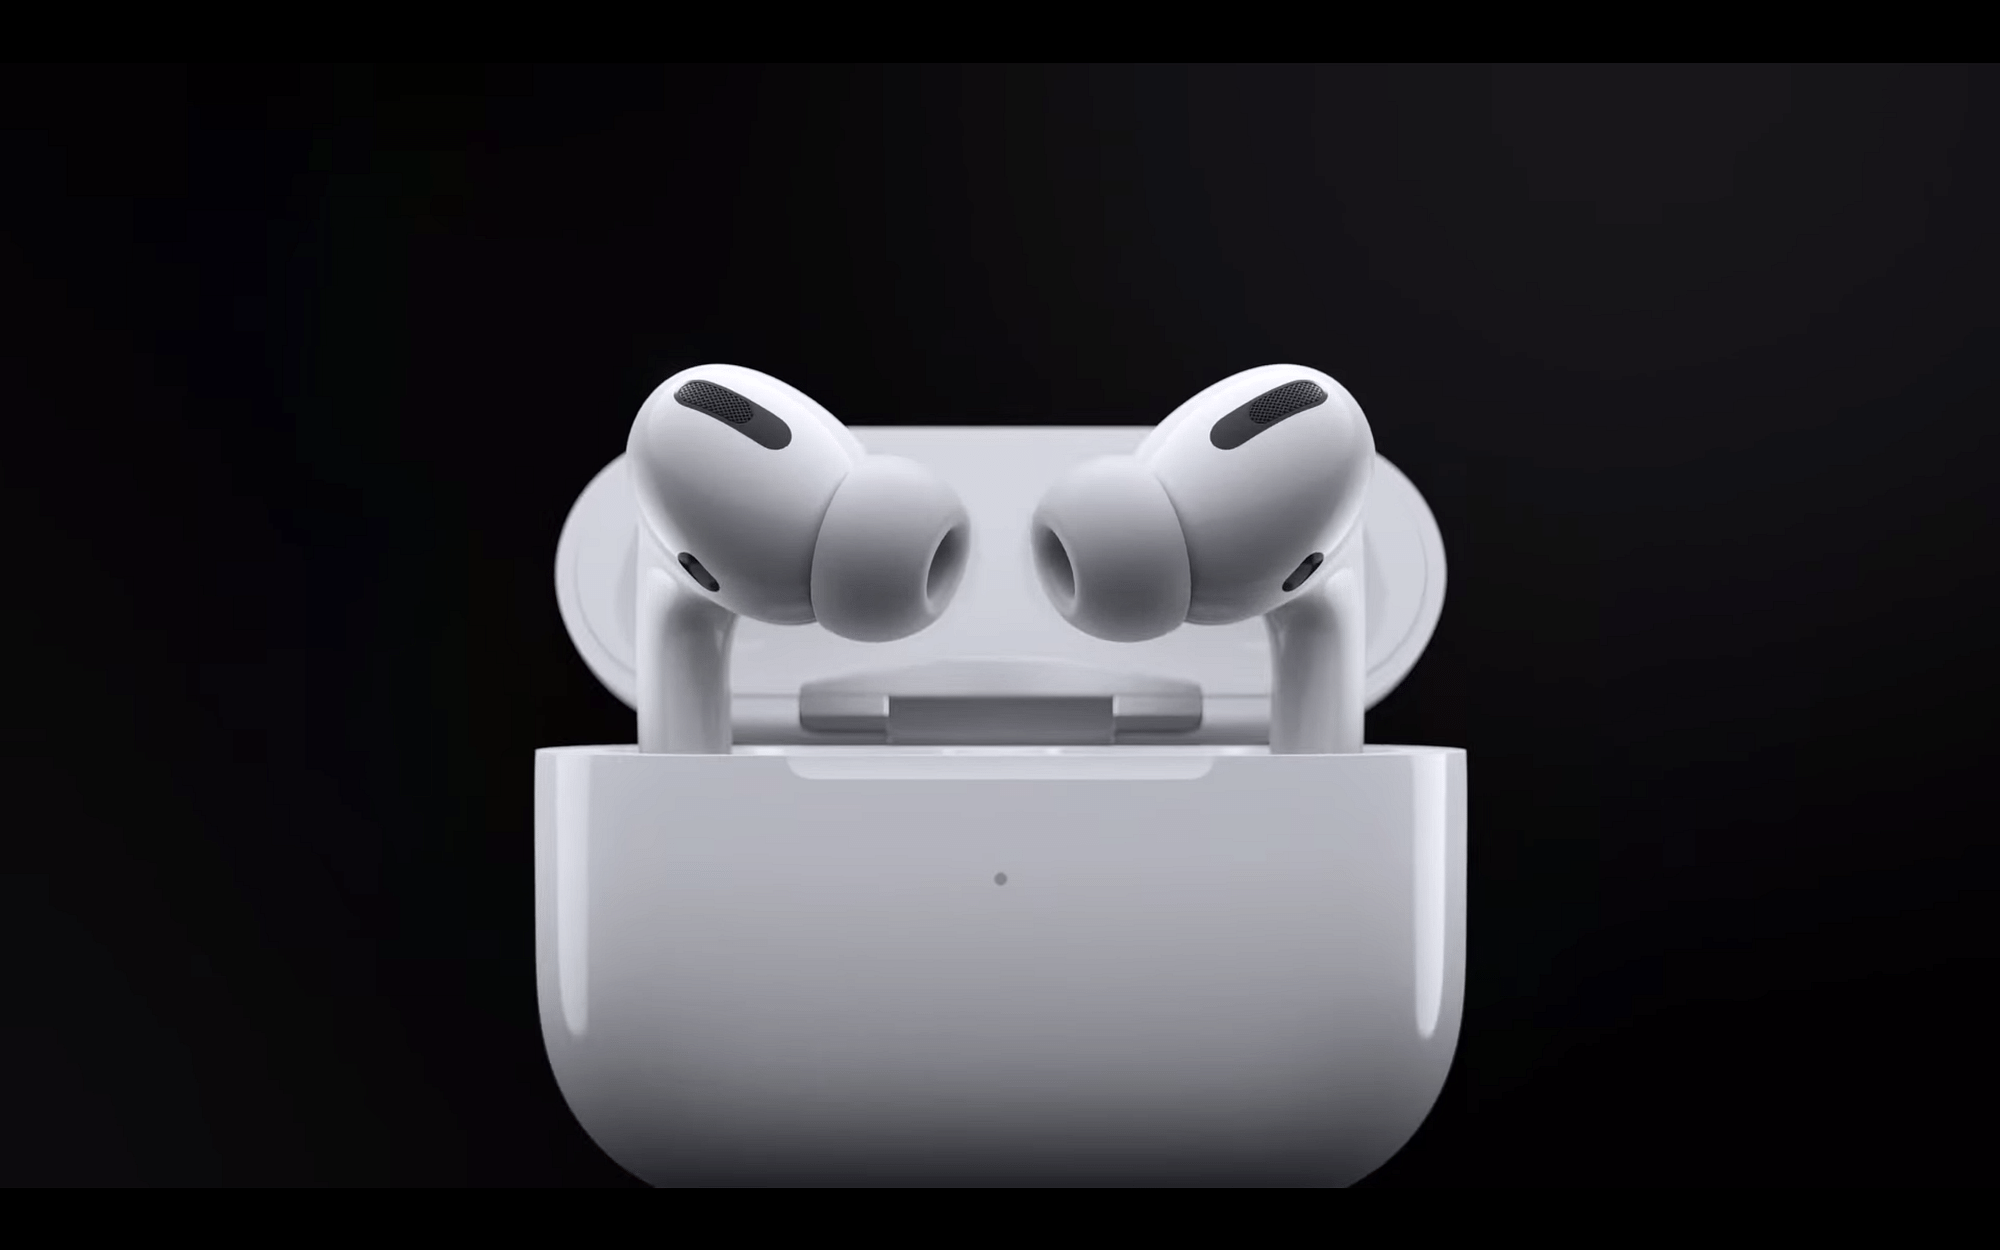 New Apple AirPods Pro Launched in India: Price, Specifications, Details